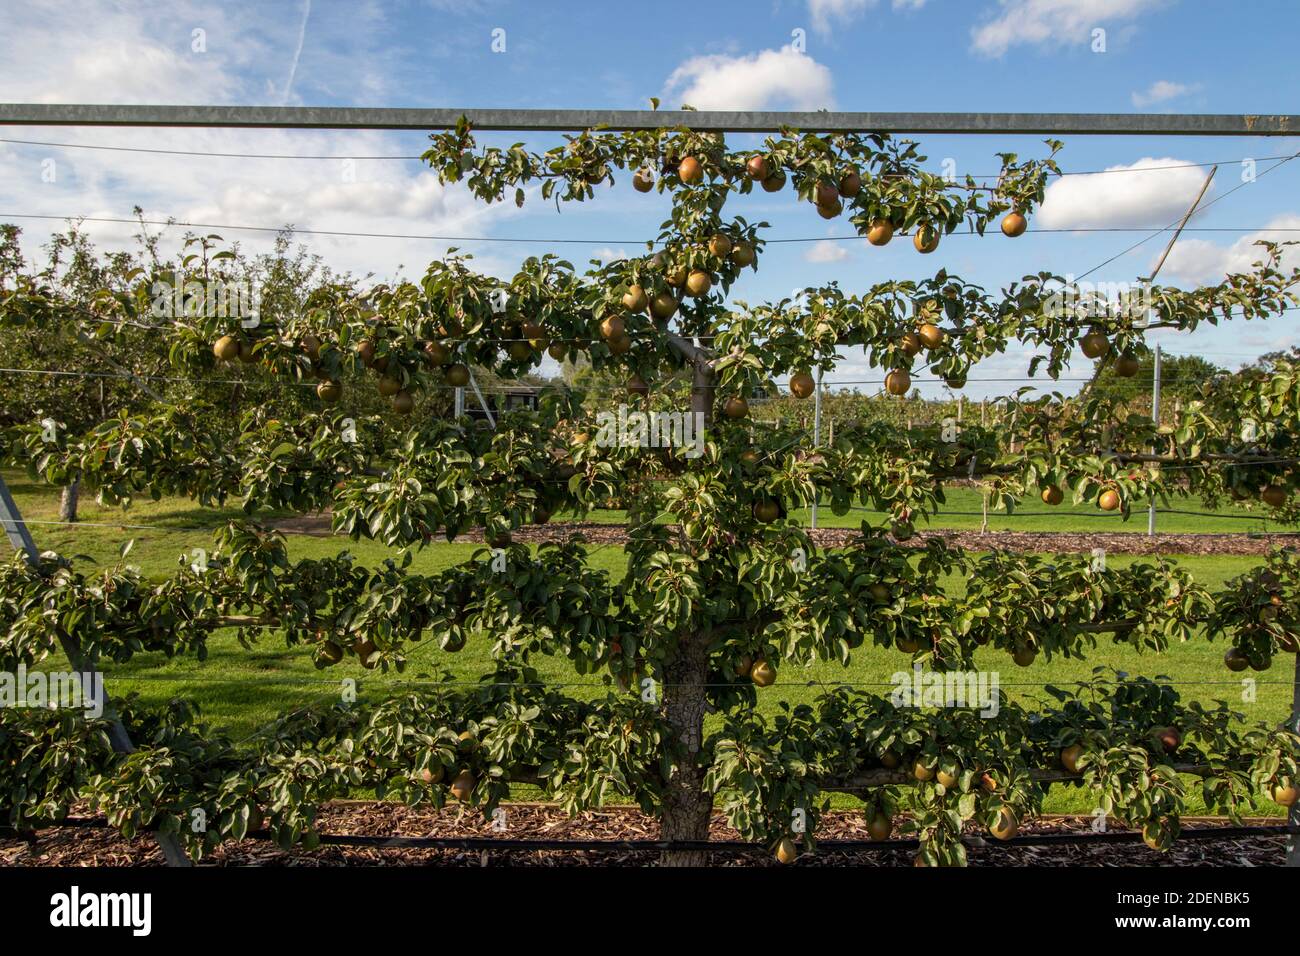 Pyrus communis 'Black Worcester' cooking pear growing on a trellis against a sunny blue sky Stock Photo